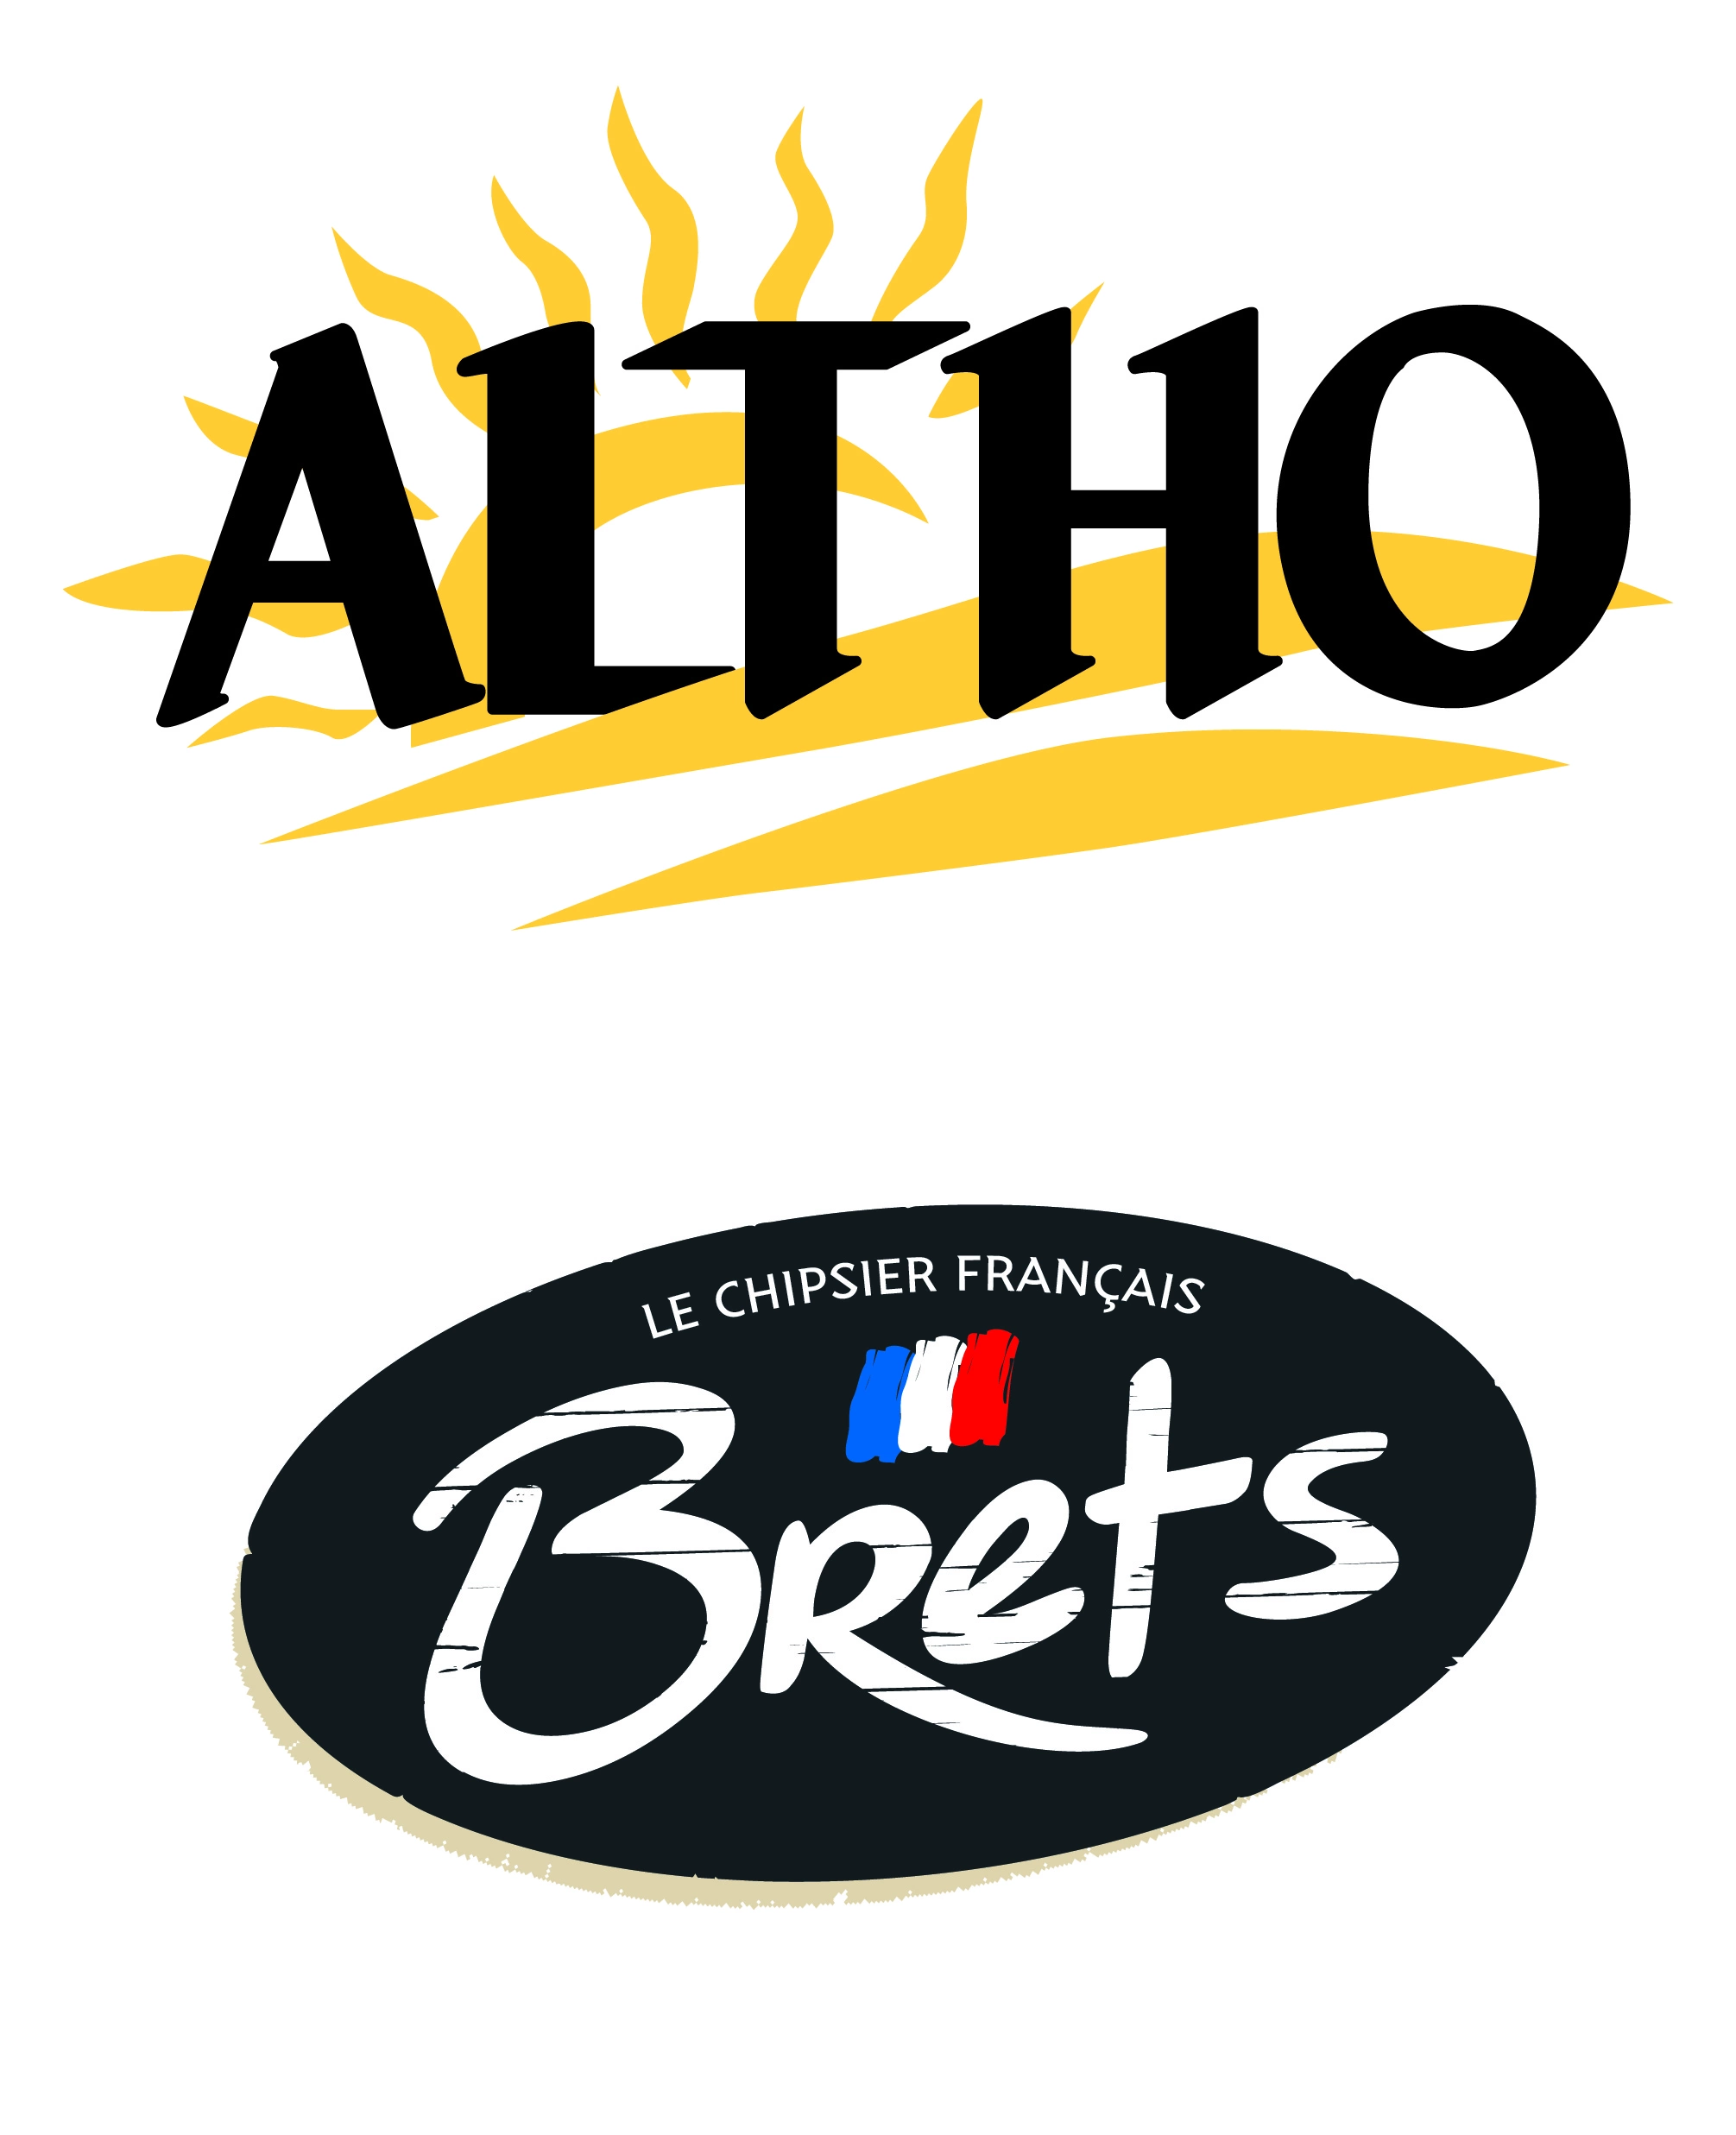 ALTHO BRETS